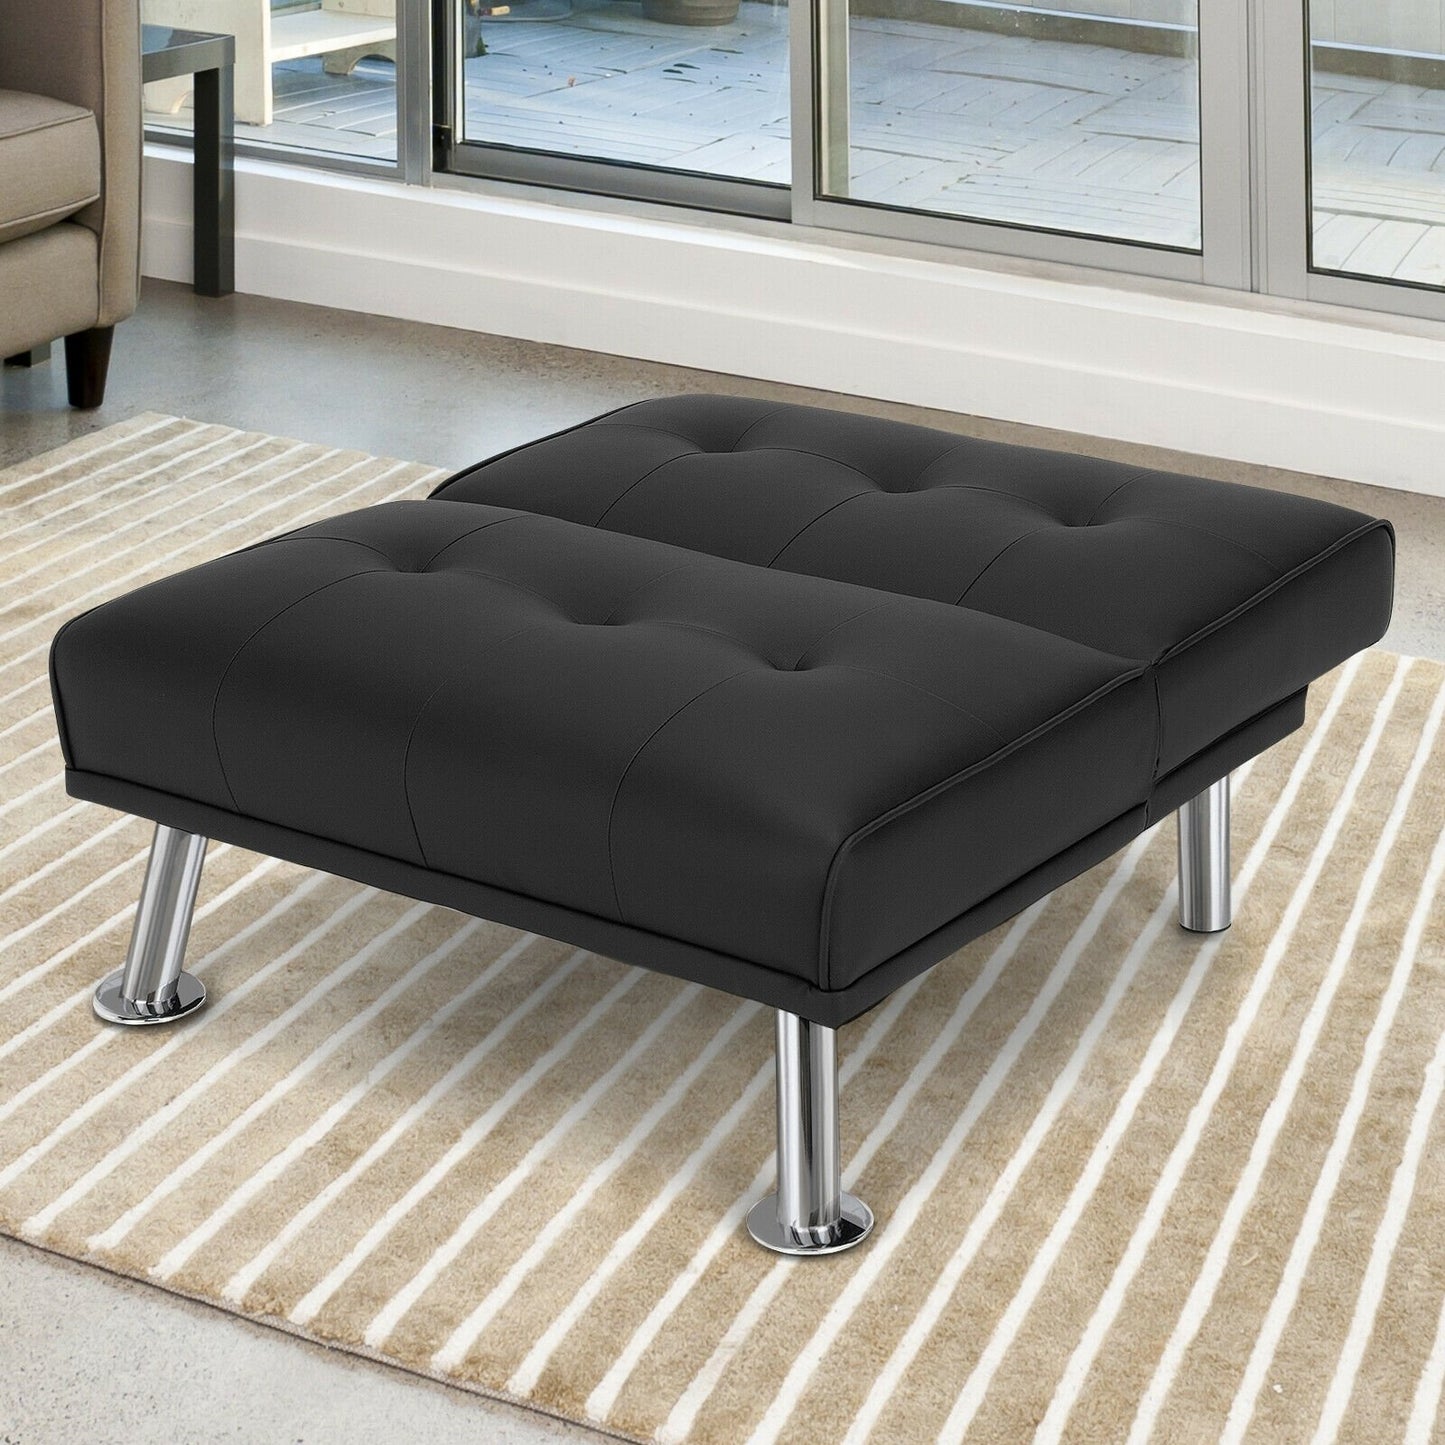 Folding PU Leather Single Sofa with Metal Legs and Adjustable Backrest, Black - Gallery Canada